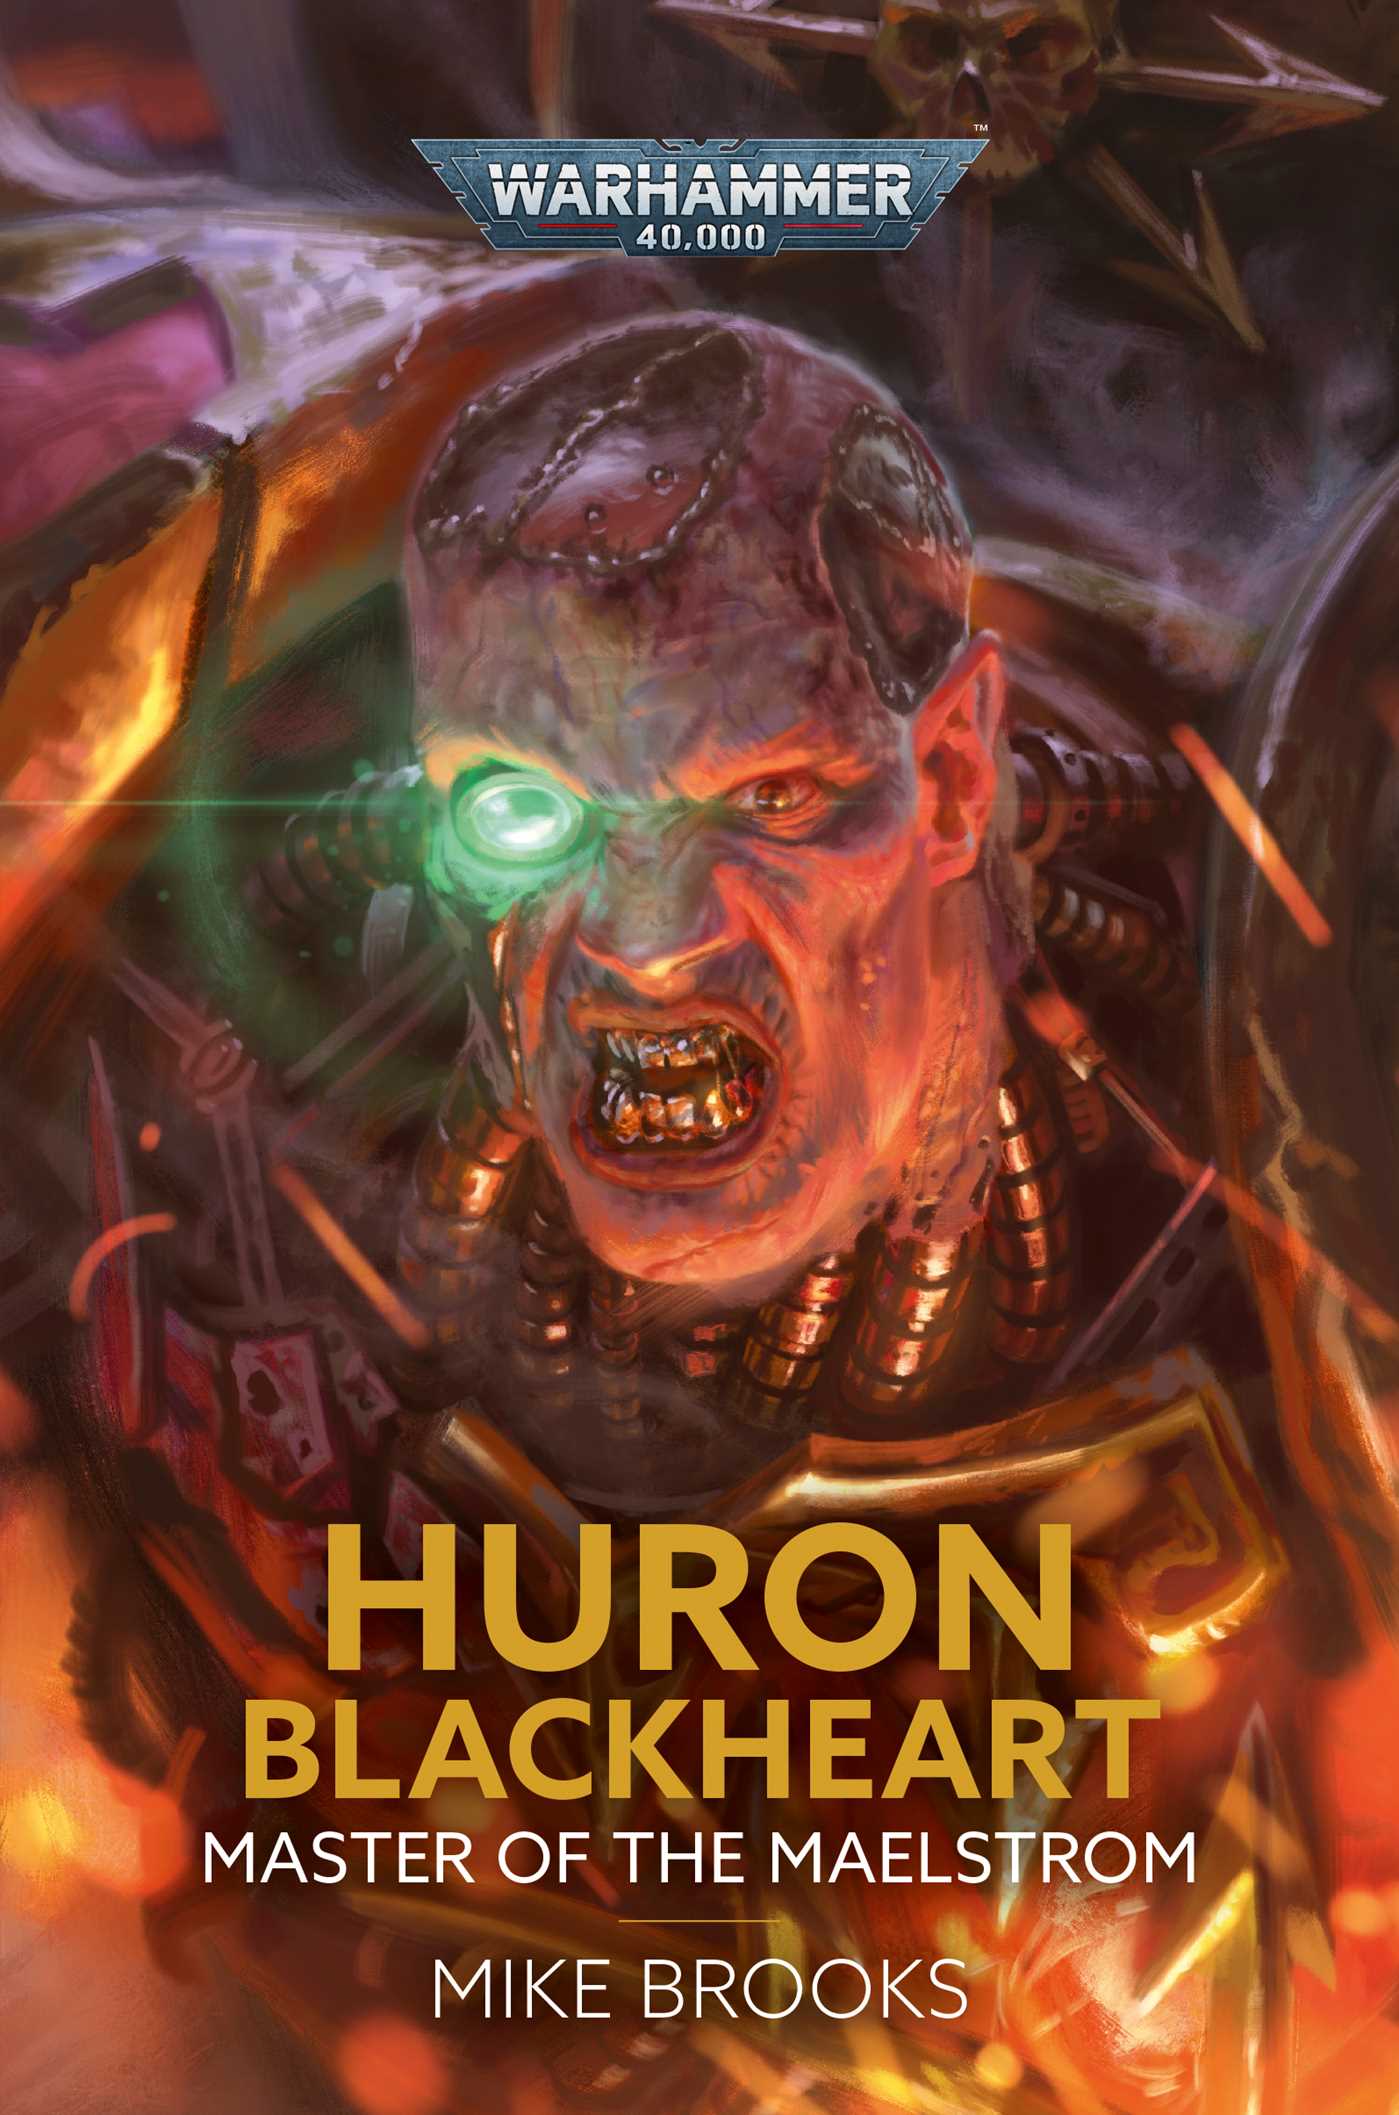 What is the story of Huron Blackheart in Warhammer 40k? 2